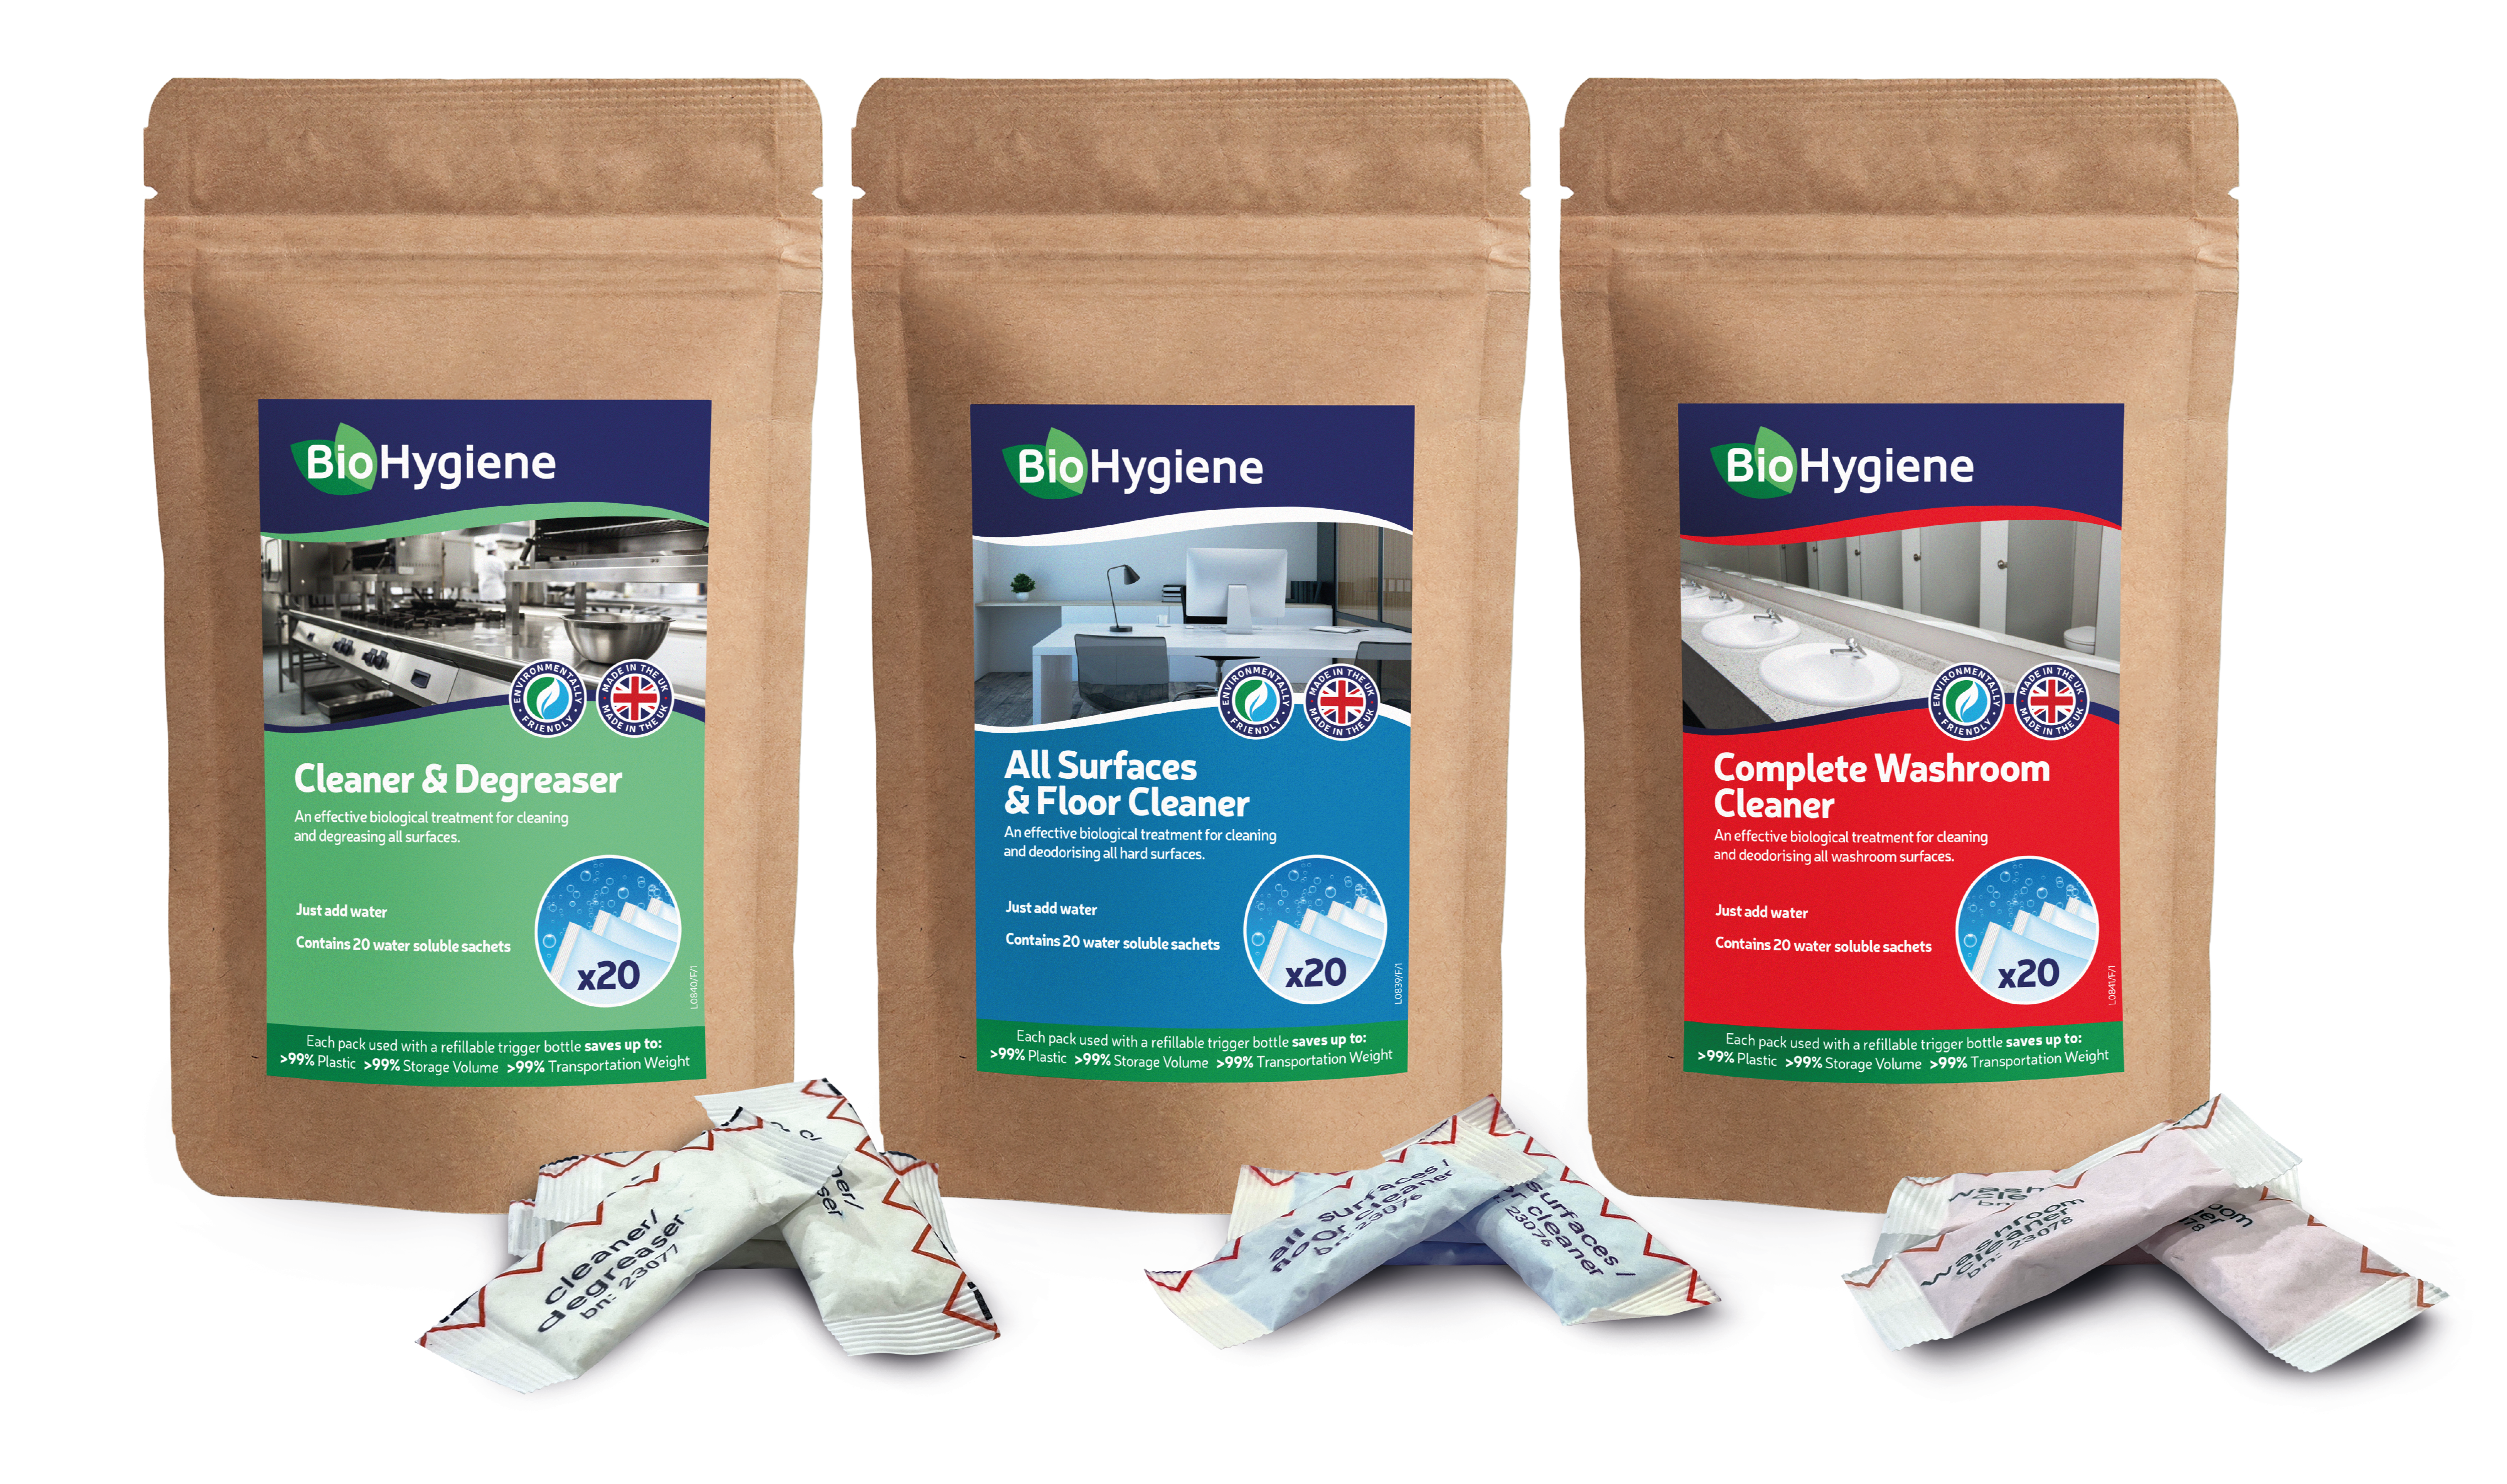 BioHygiene Biotech Sachets Named Finalists at European Cleaning Awards